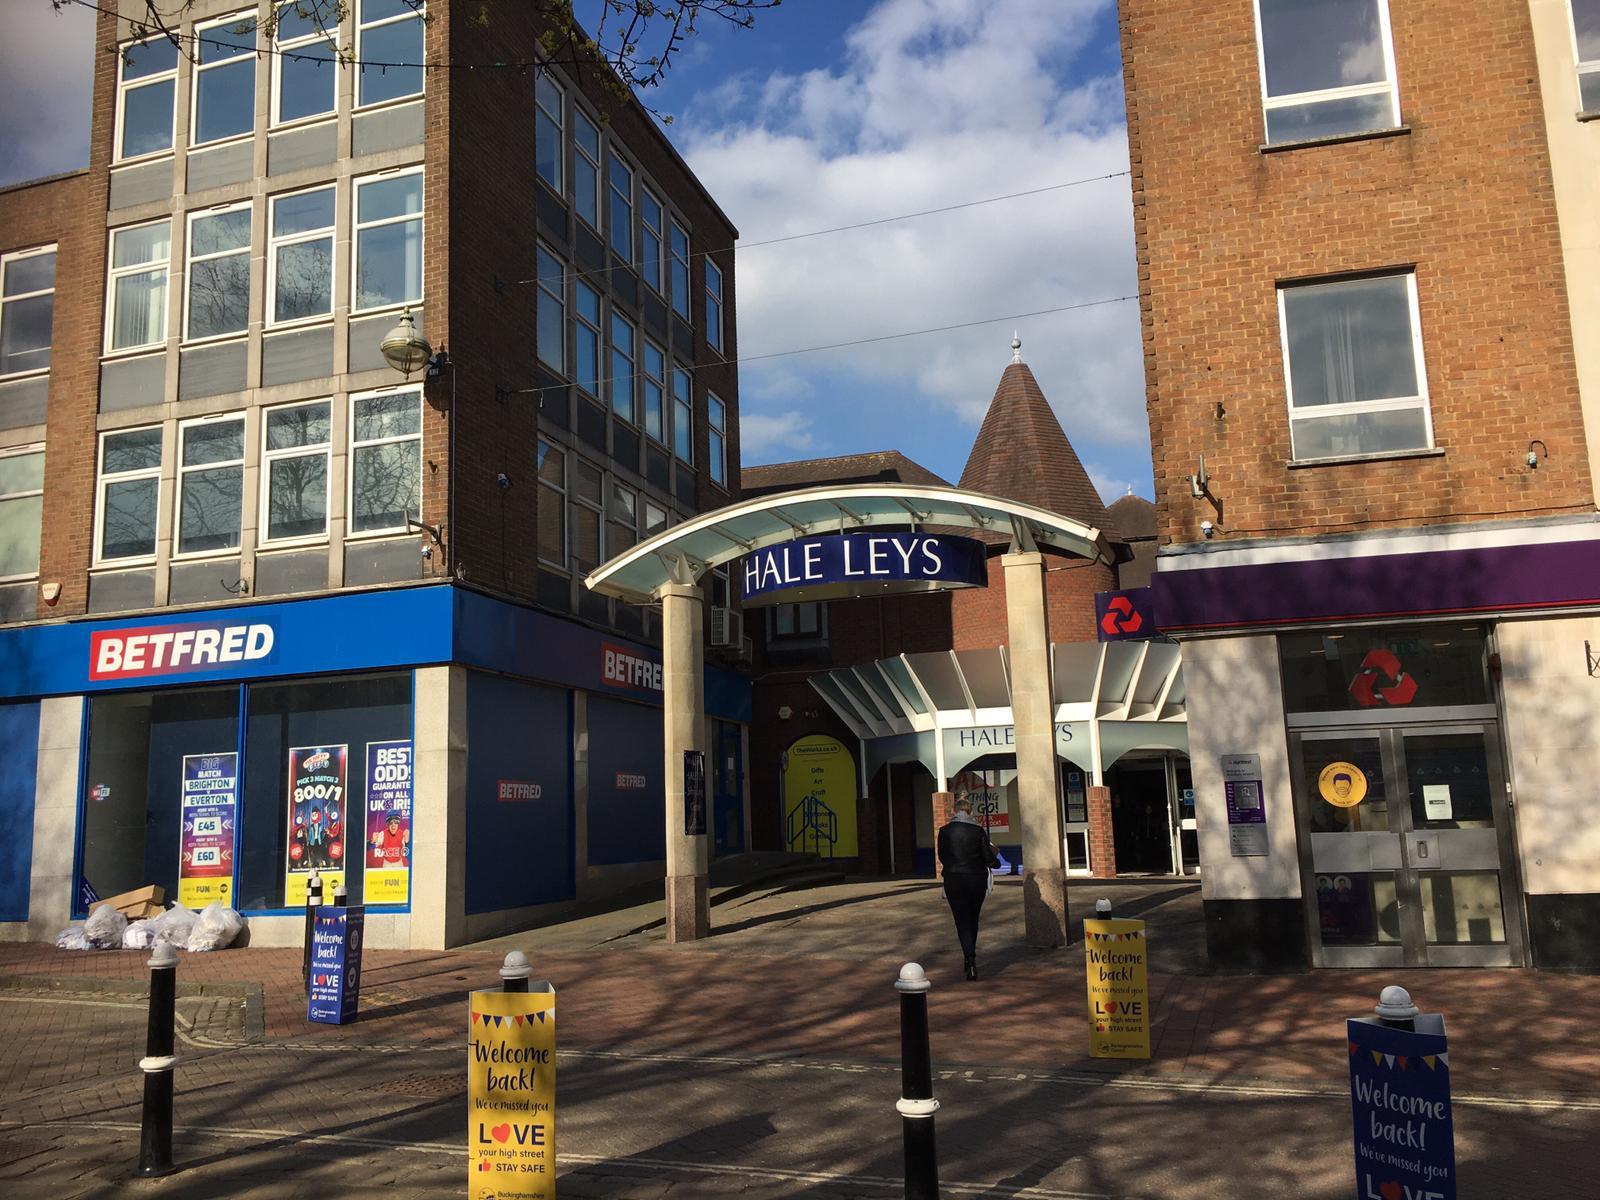 The Hale Leys Shopping Centre in Aylesbury